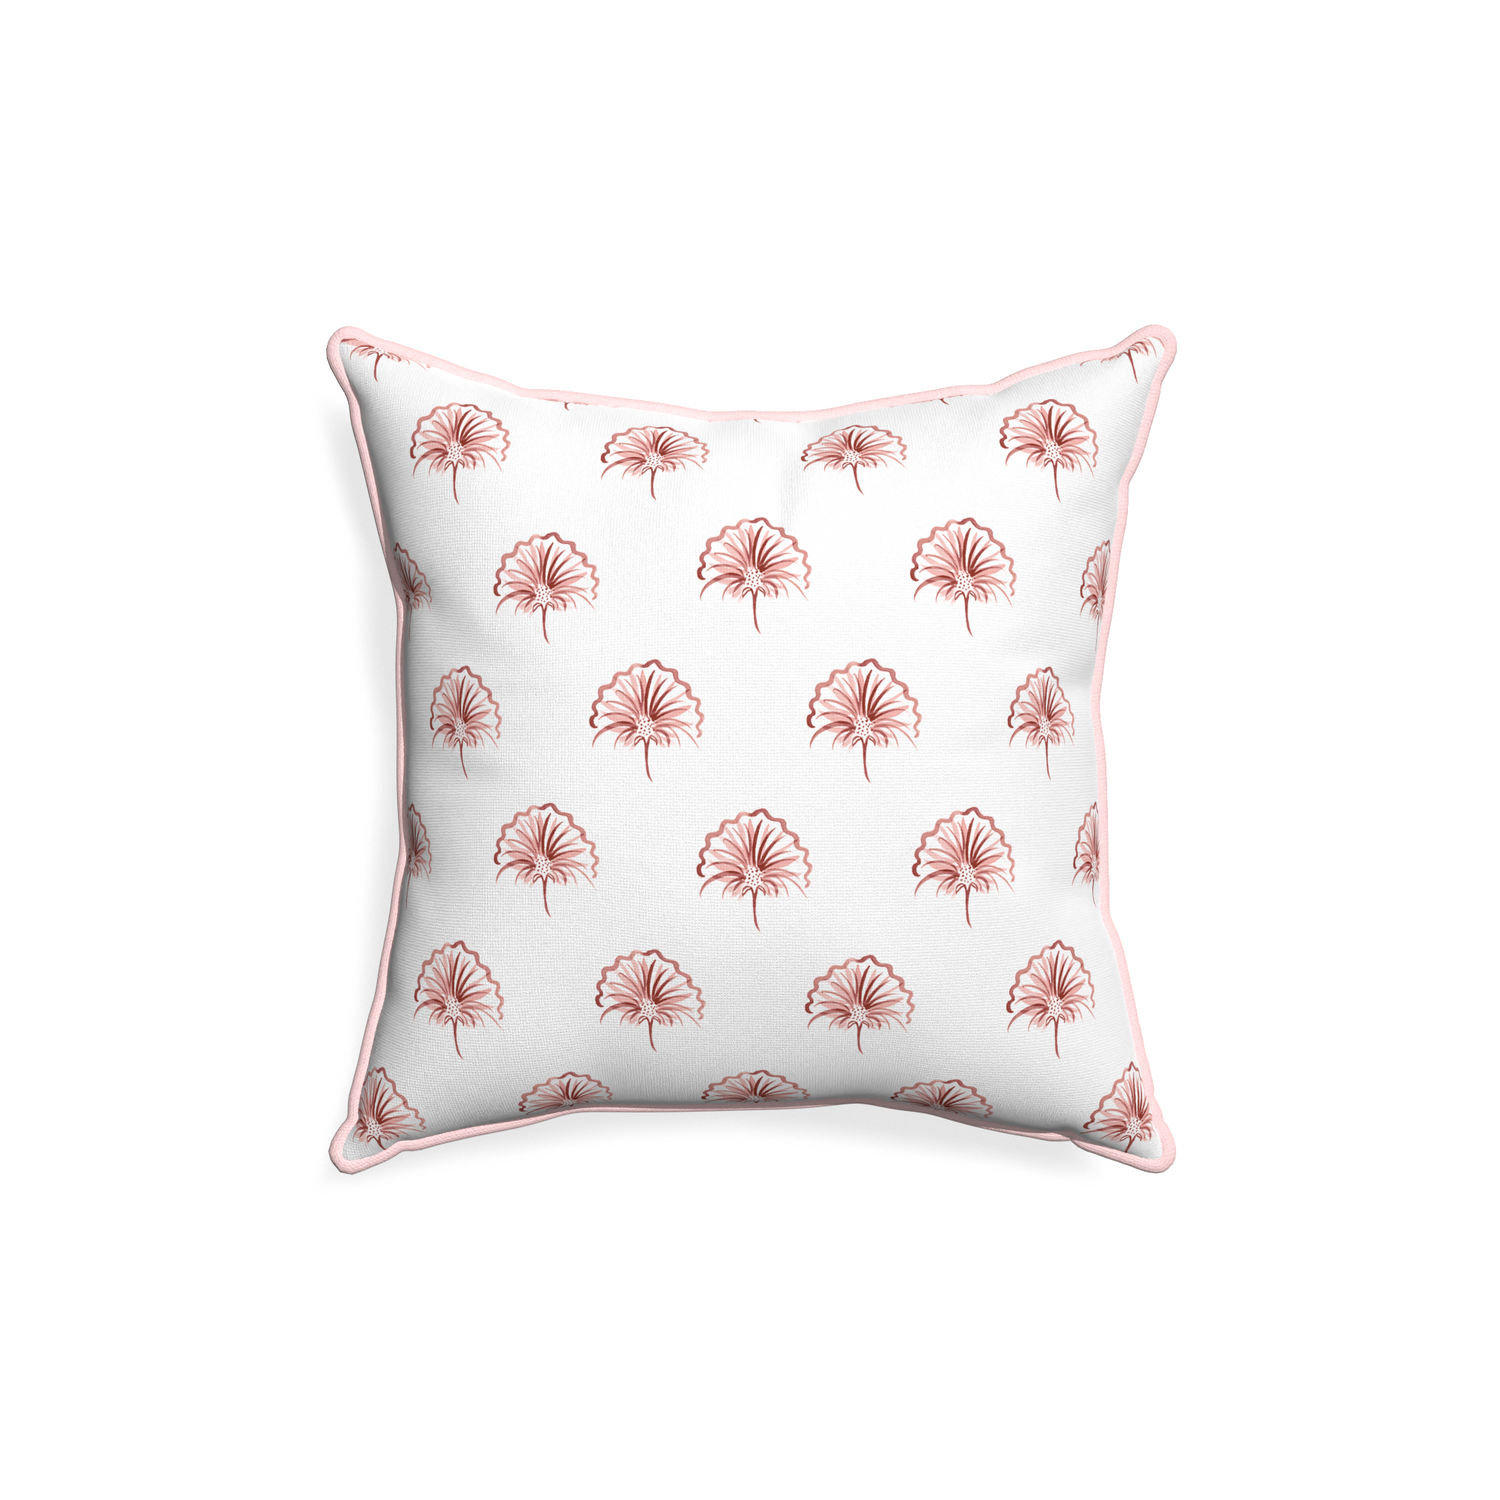 18-square penelope rose custom pillow with petal piping on white background